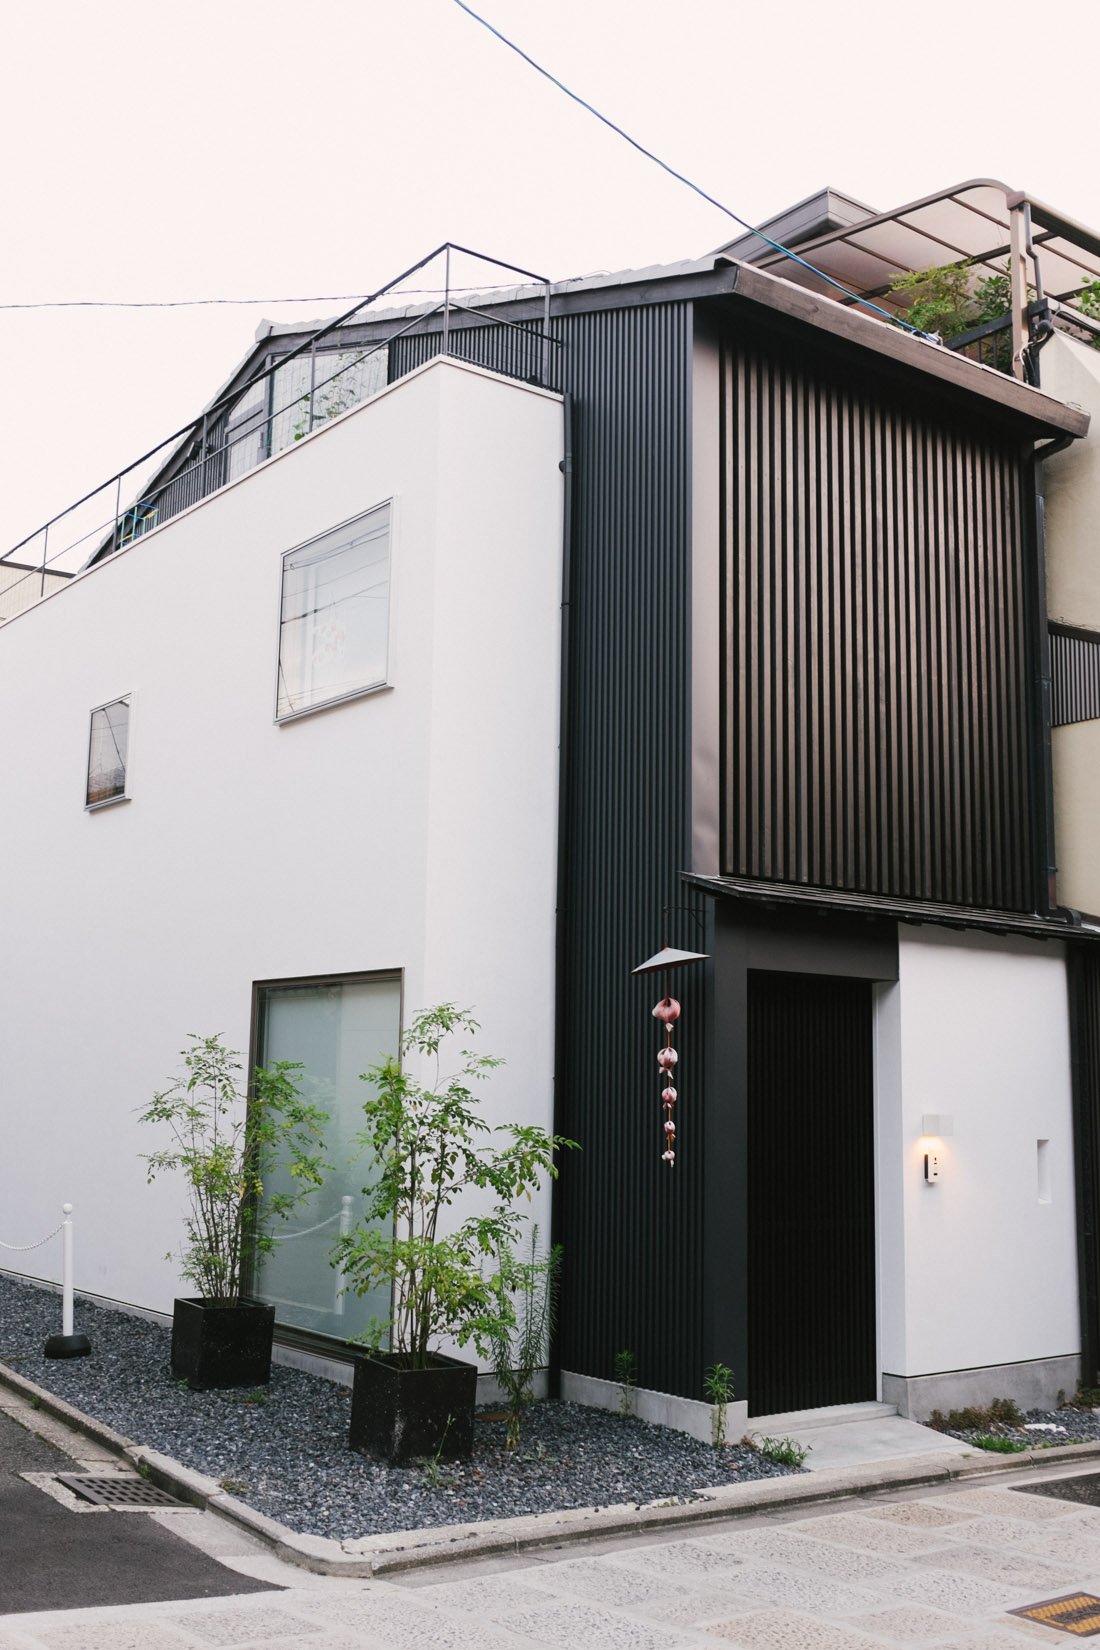 Awesome modern house in the Gion district, known for its traditional houses.